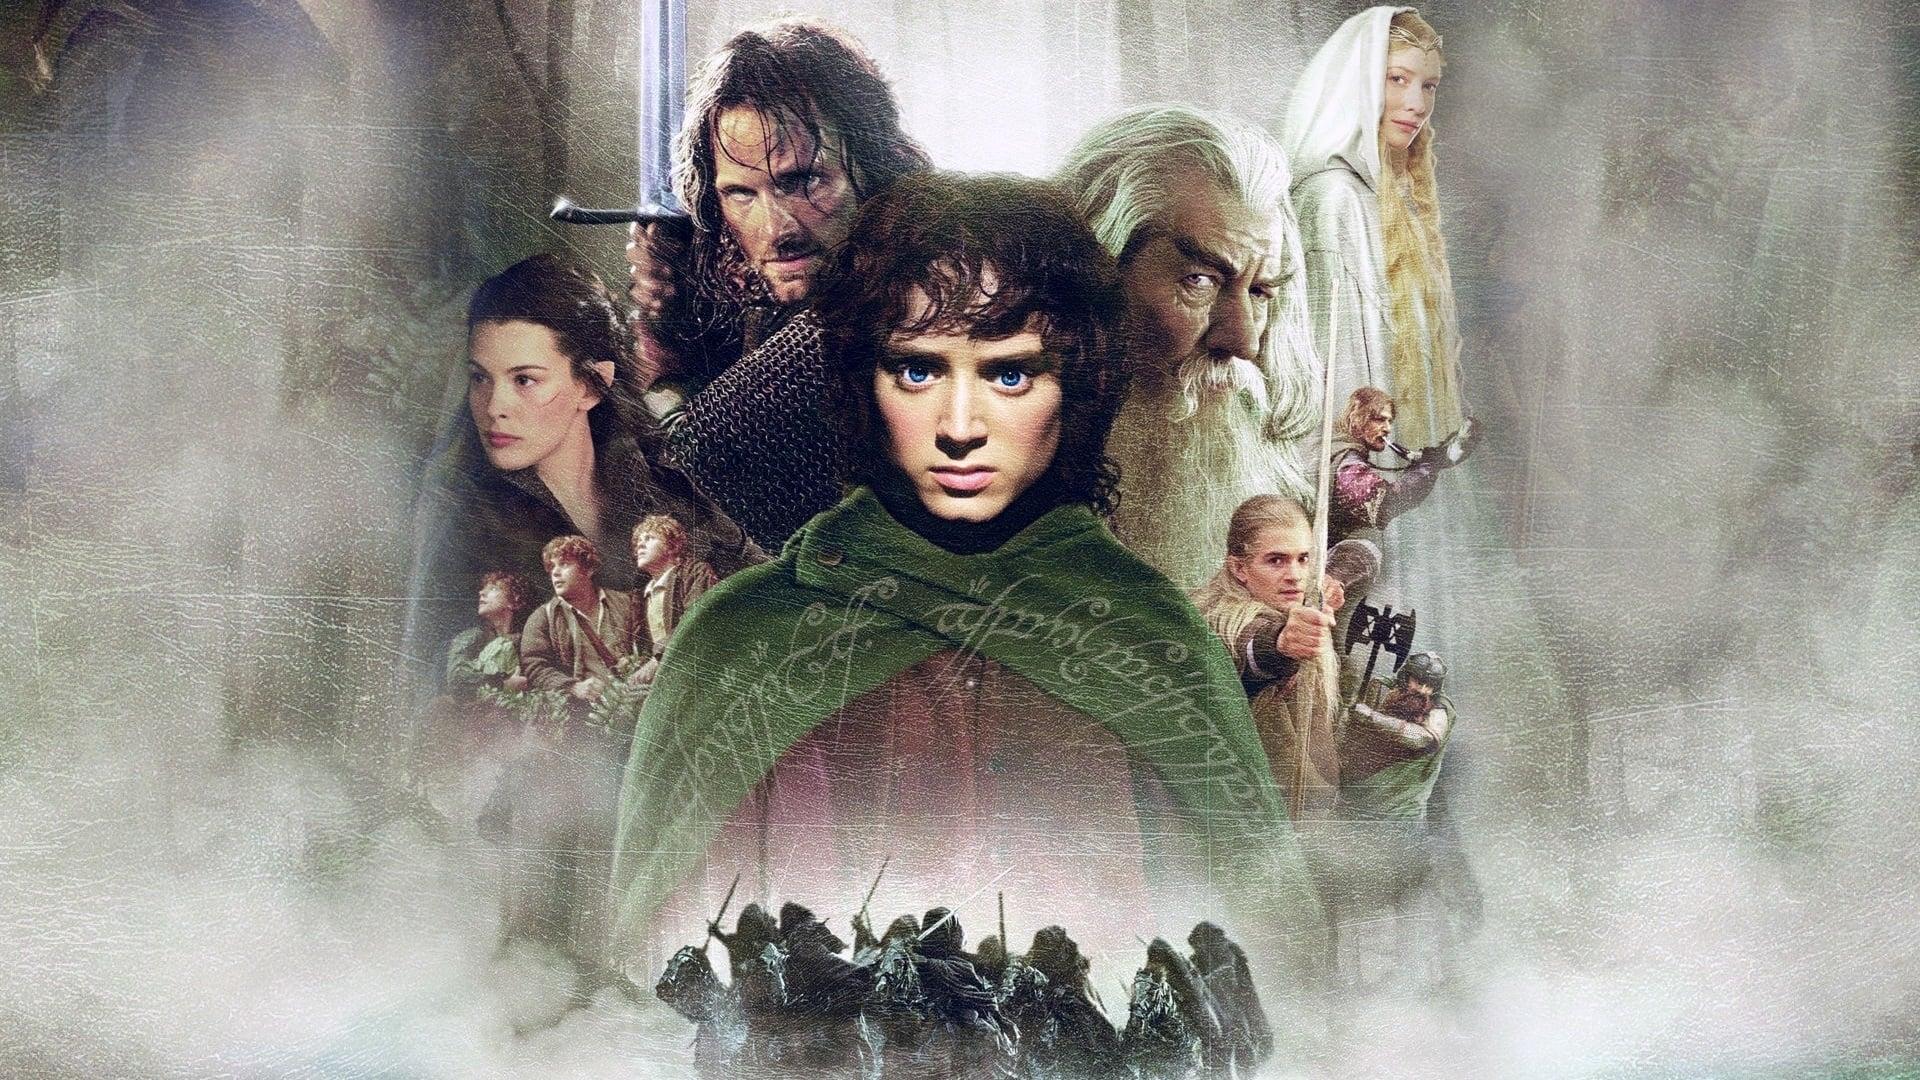 The Lord of the Rings: The Fellowship of the Ring backdrop